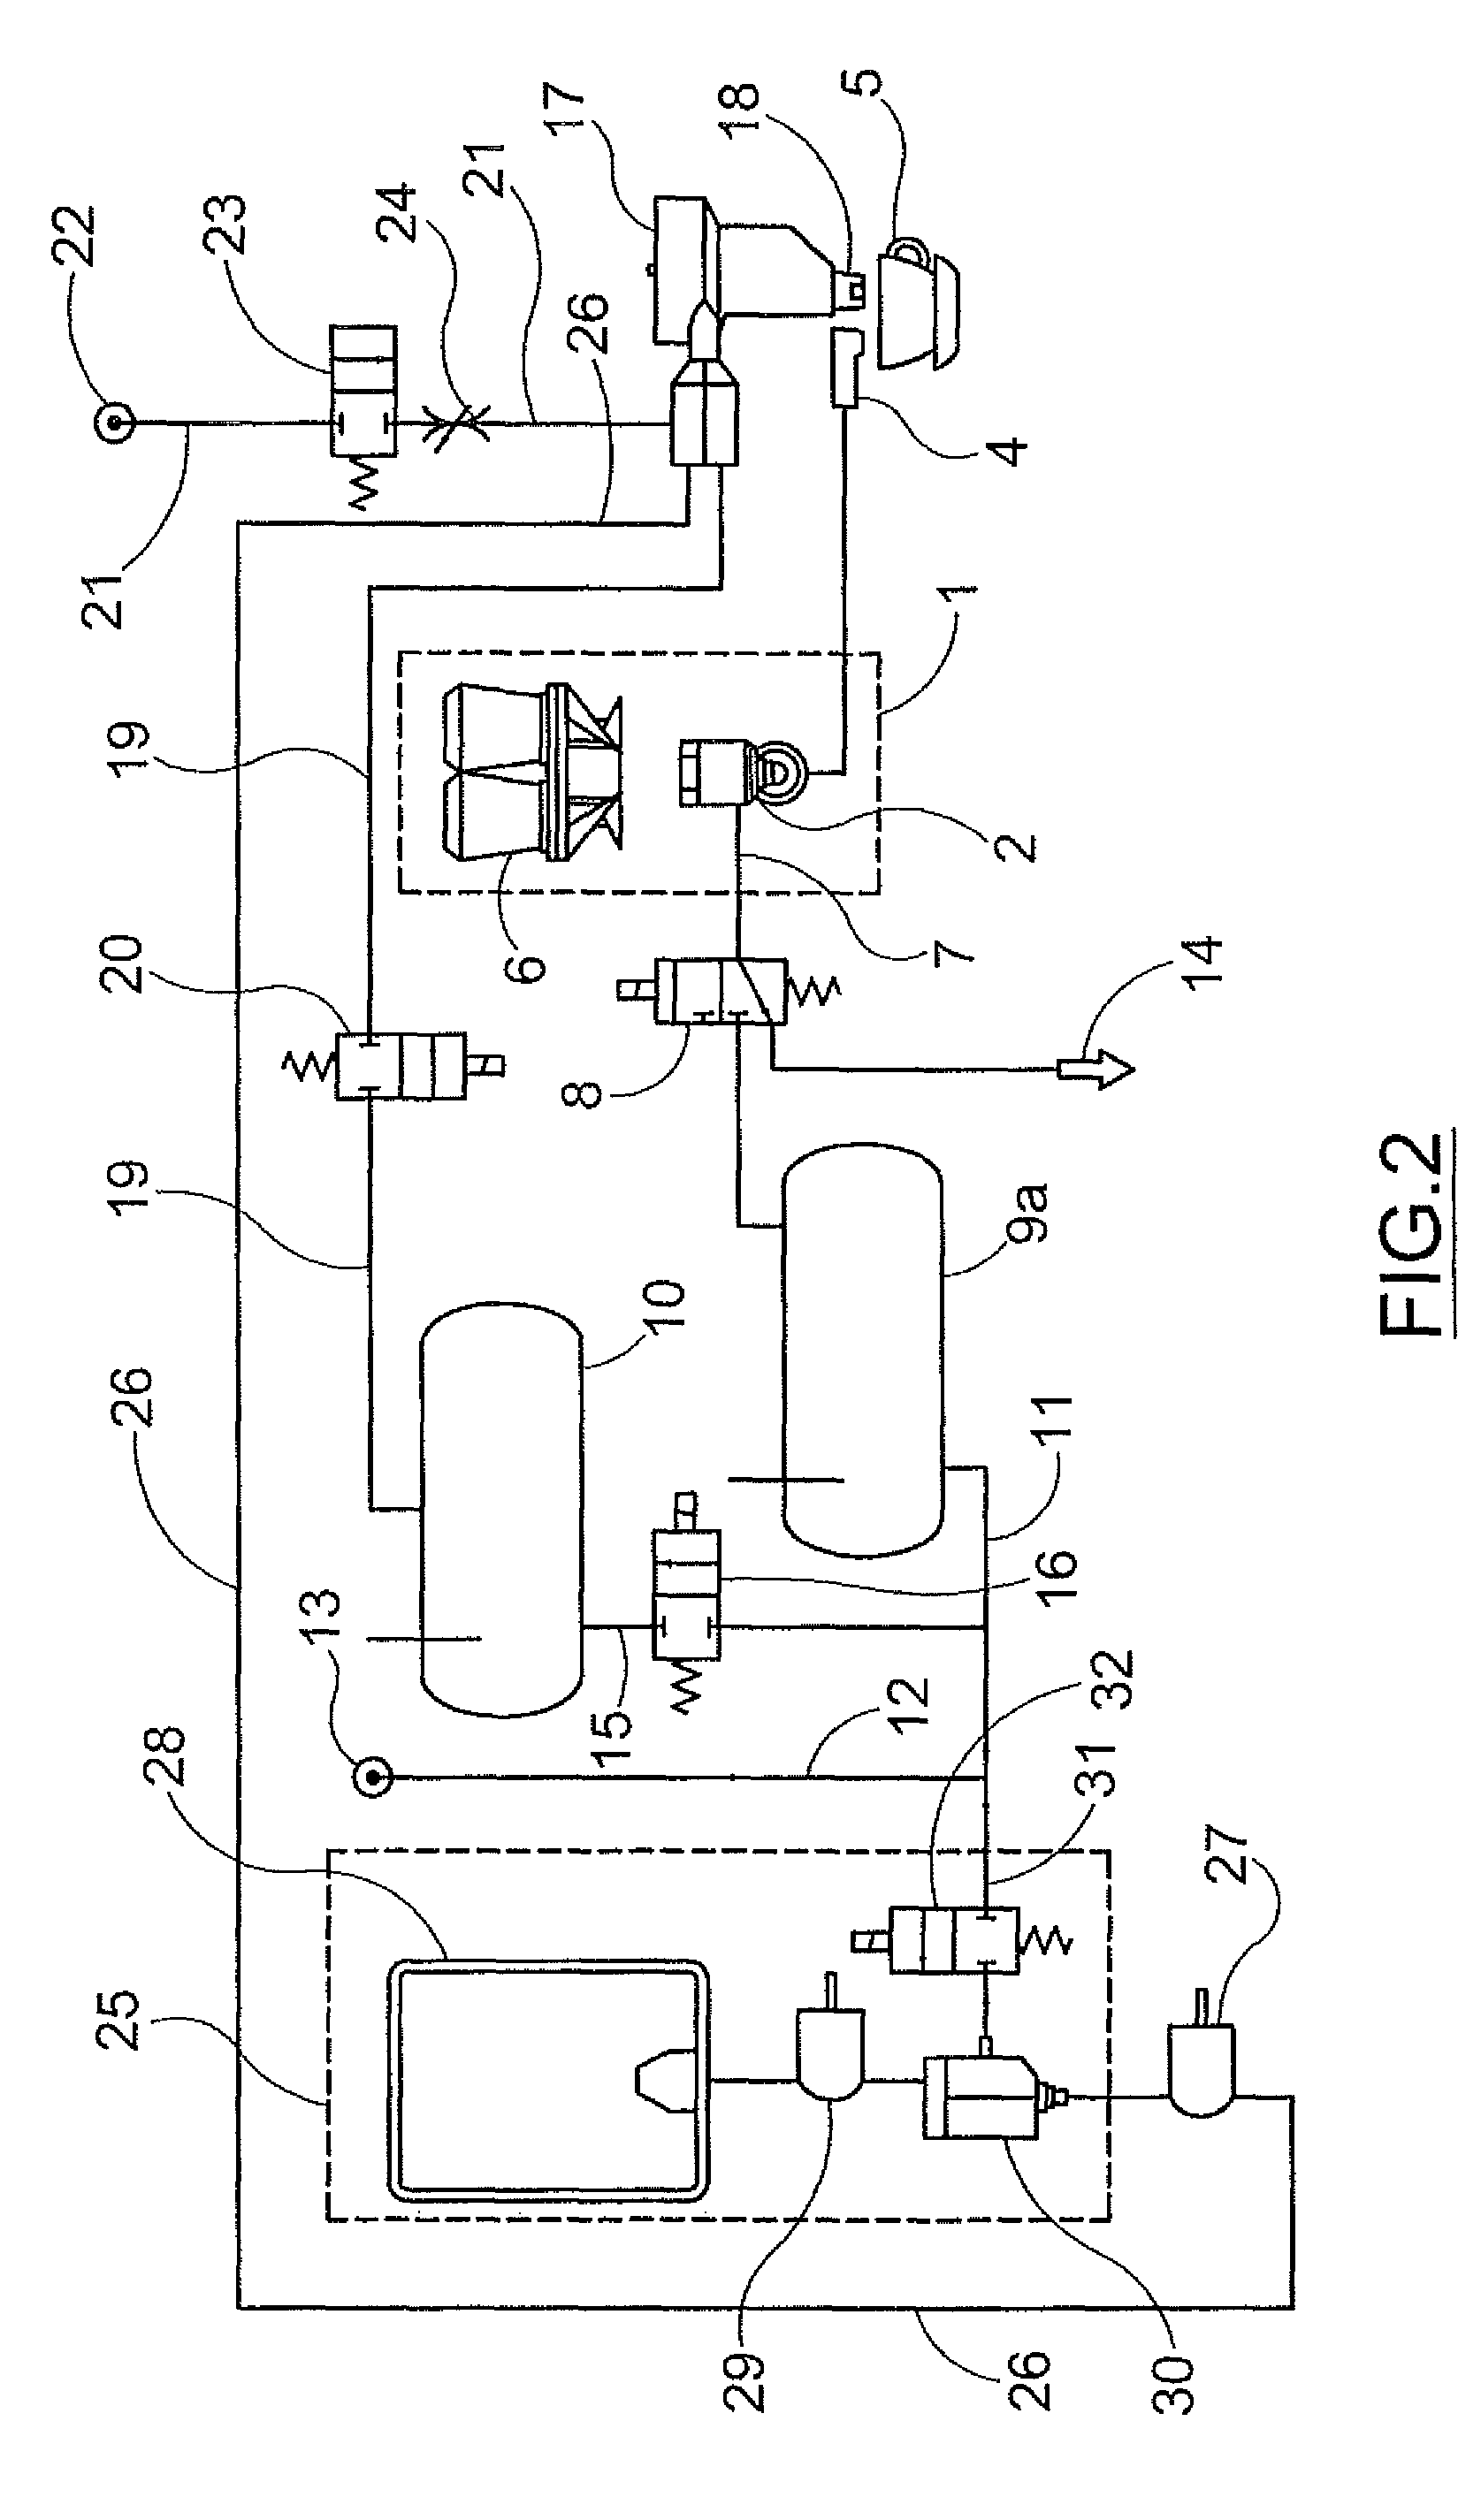 Apparatus and method for preparing milk under various temperature and consistency conditions in a coffee machine for forming various types of beverages